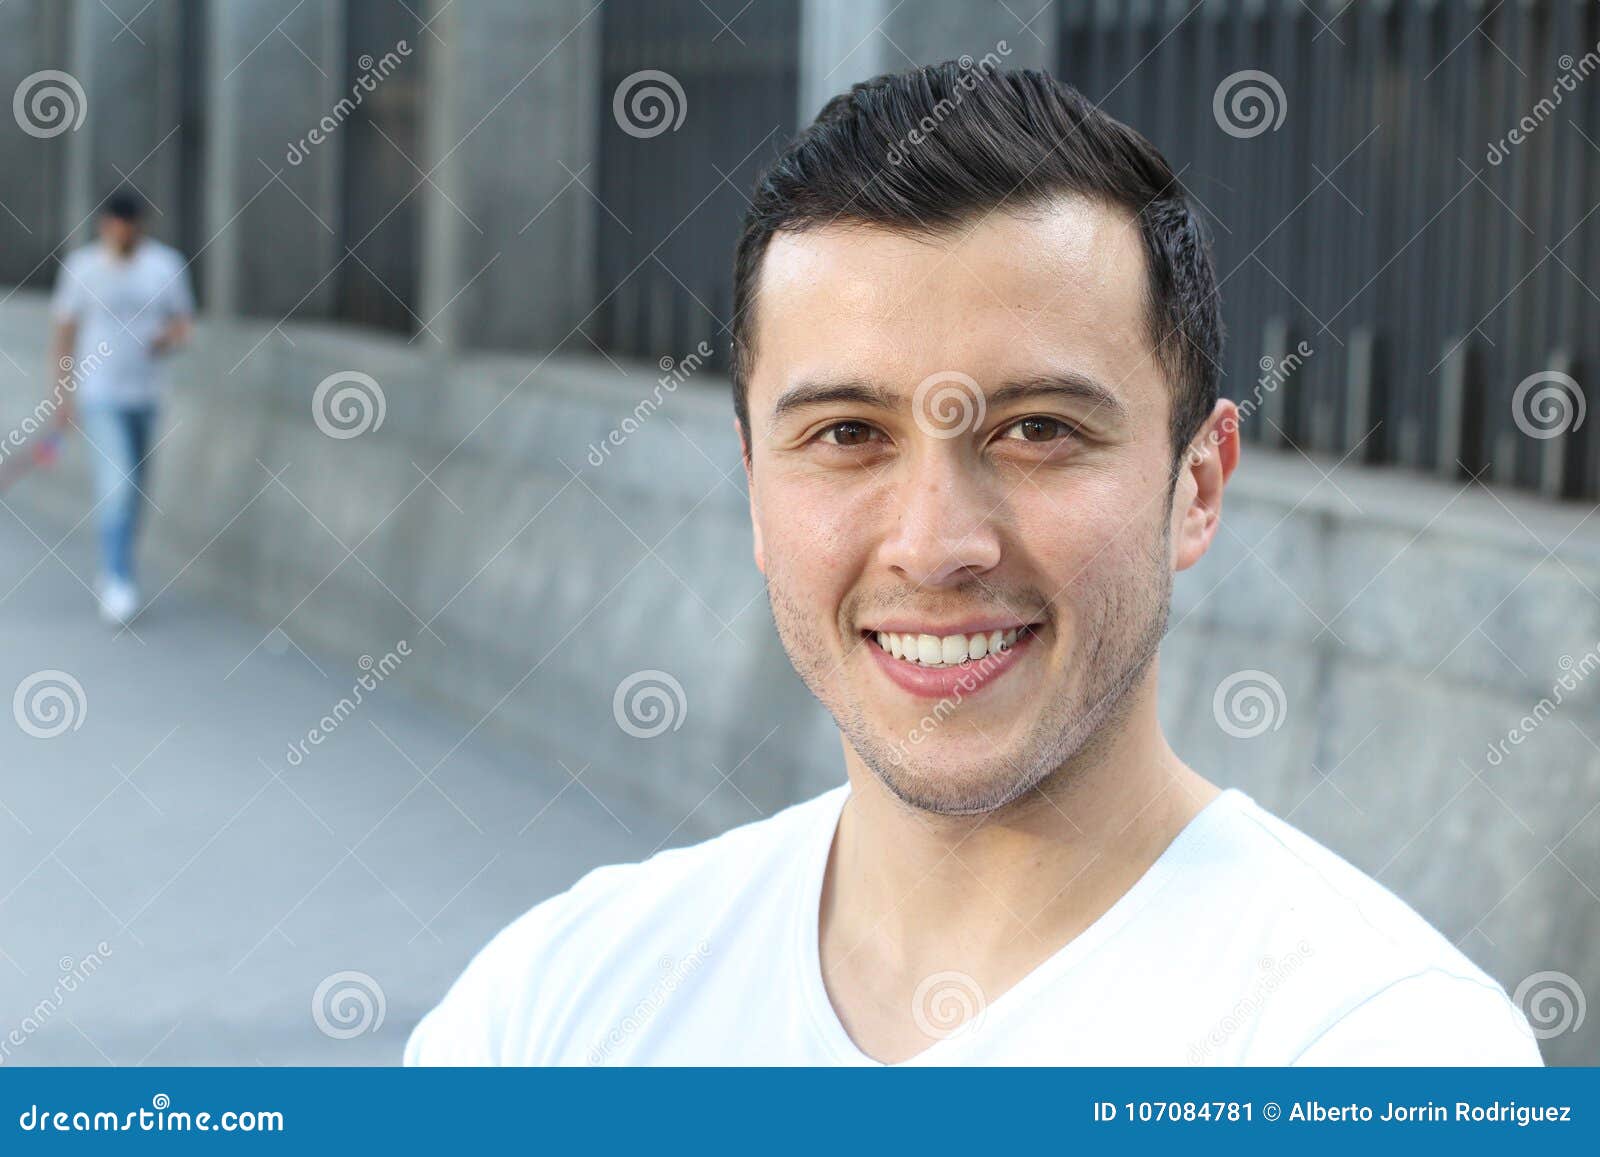 ethnically ambiguous male smiling with copy space